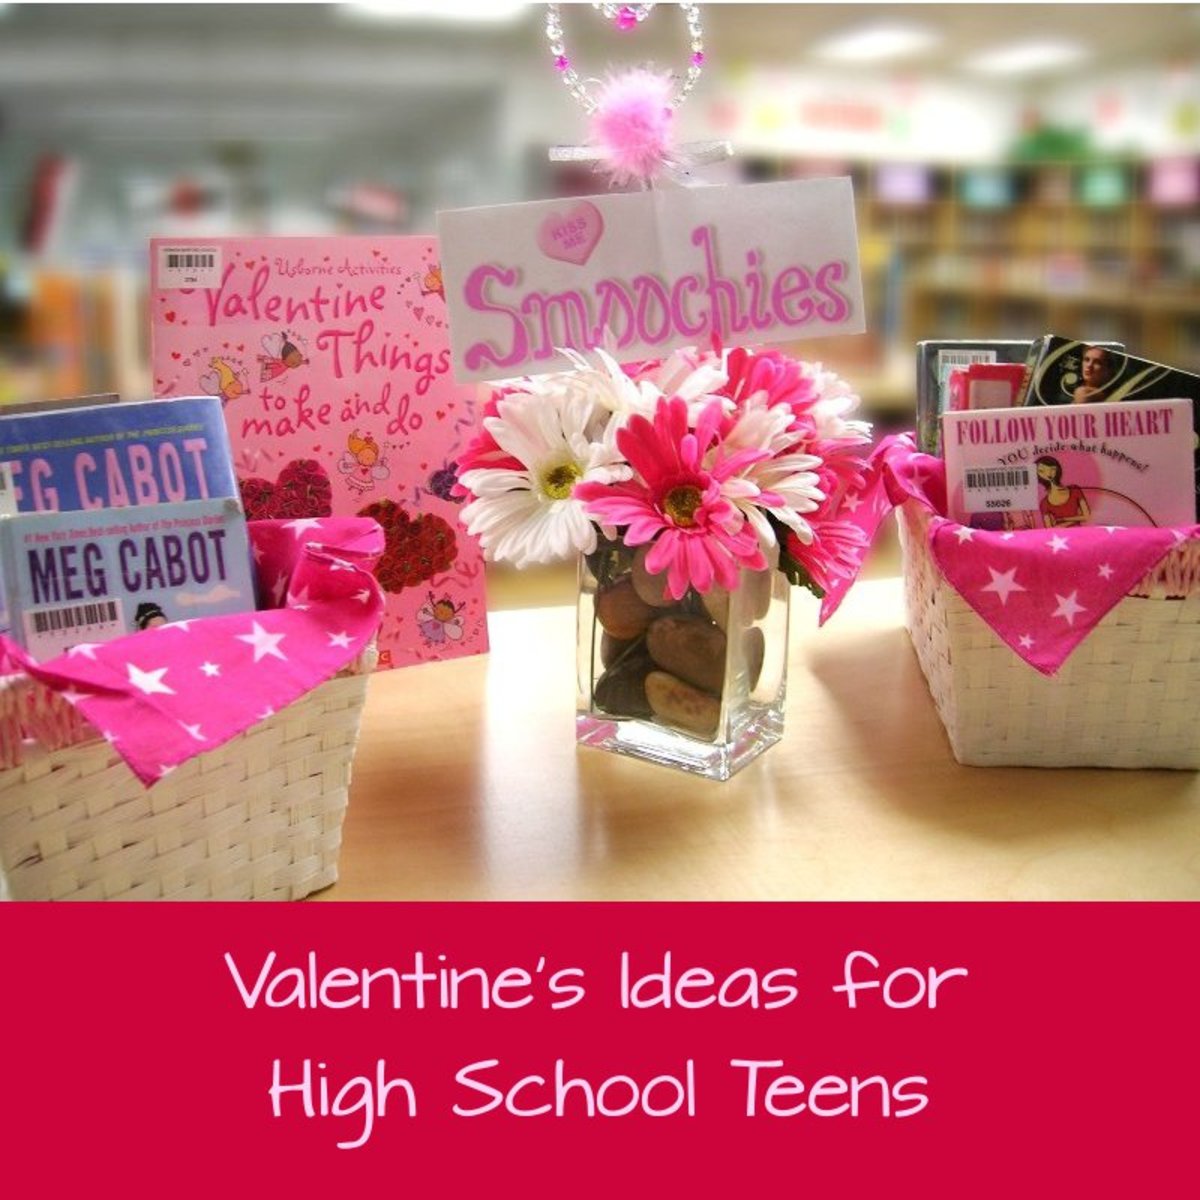 Valentine's Day Gift Ideas for High School Teens